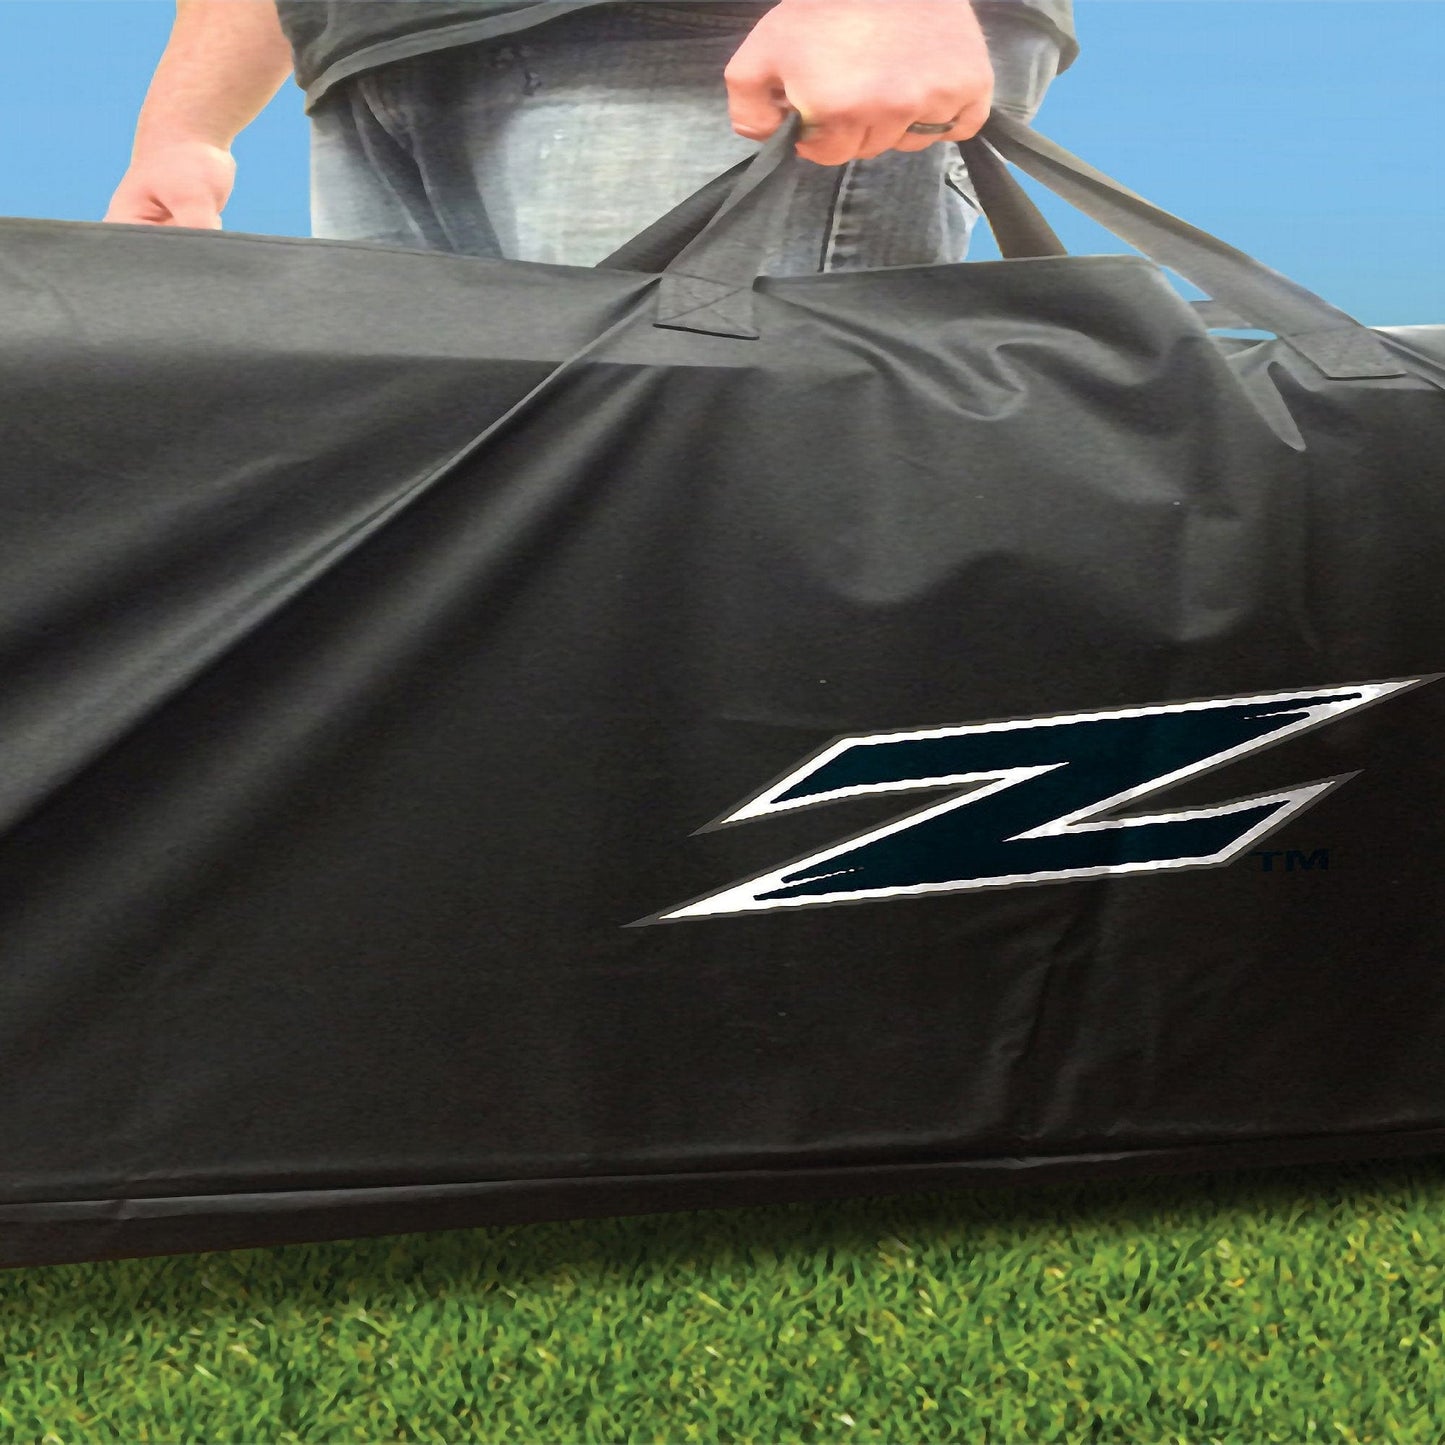 Akron Zips Stained Pyramid team logo carry case